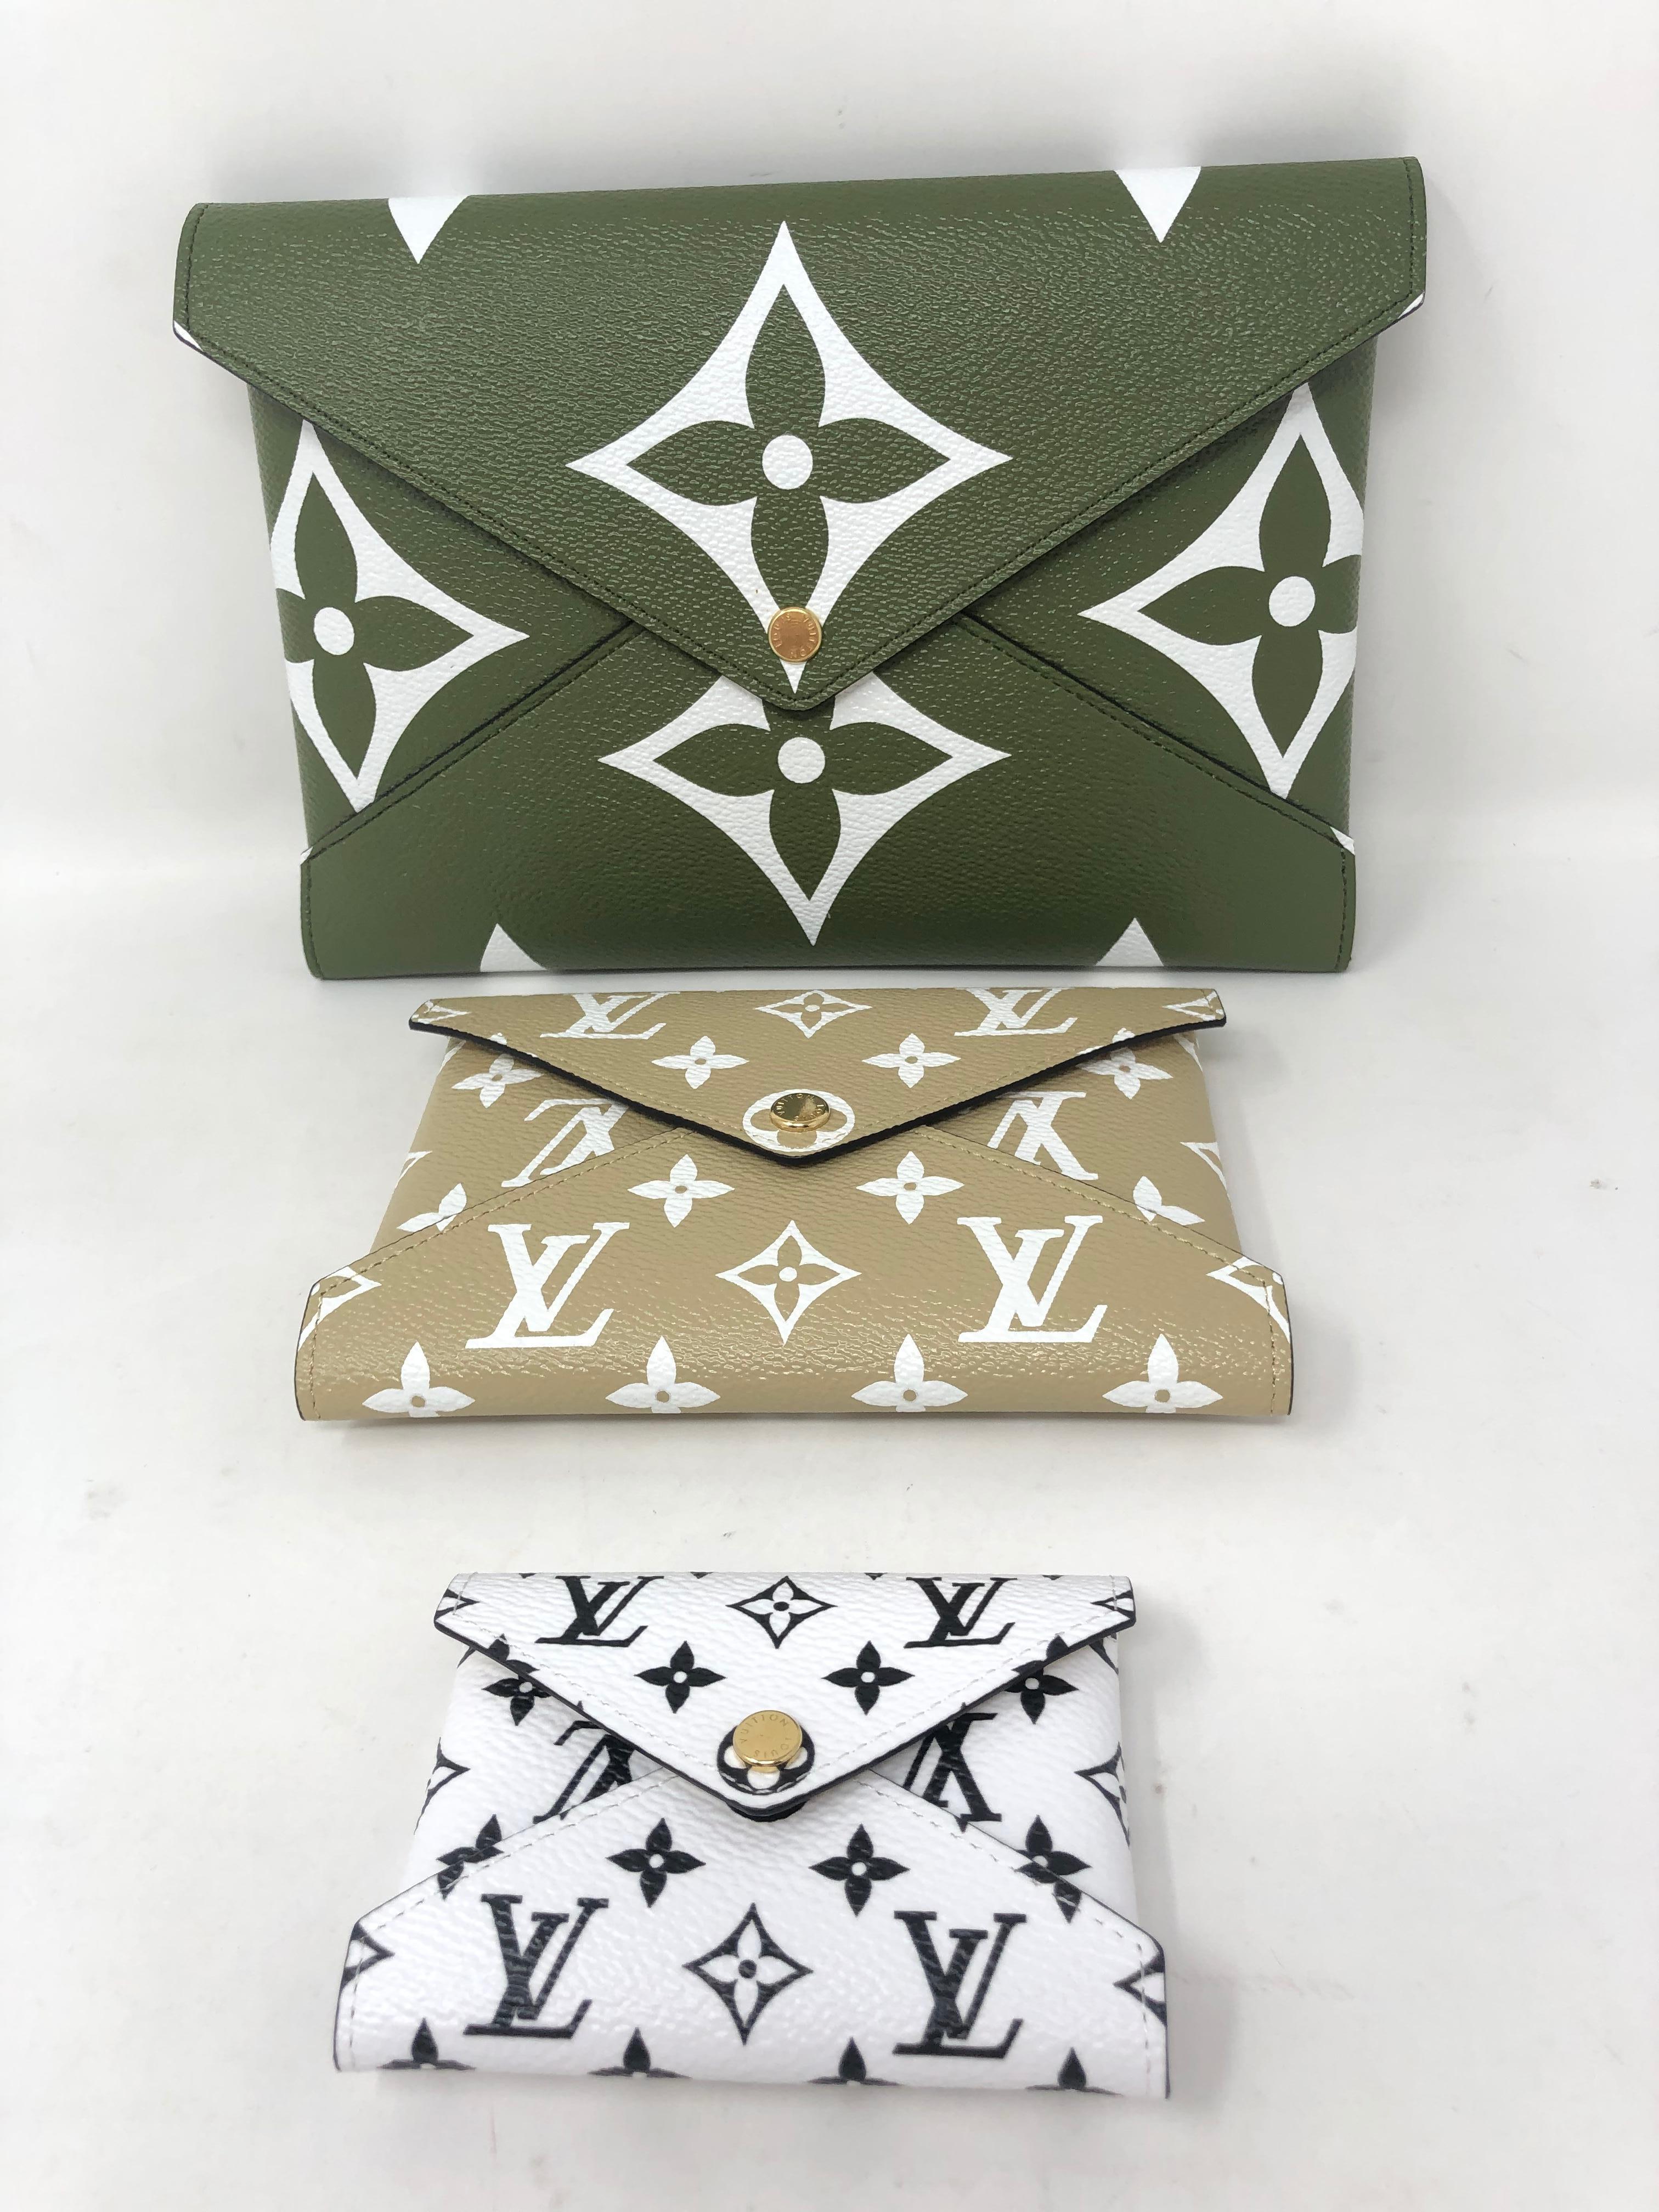 Louis Vuitton Mono Giant Kirigami Pochette Set in Green. Includes all 3 pieces in the set. Brand New. Includes dust cover and box. Limited and rare set. Guaranteed authentic. 